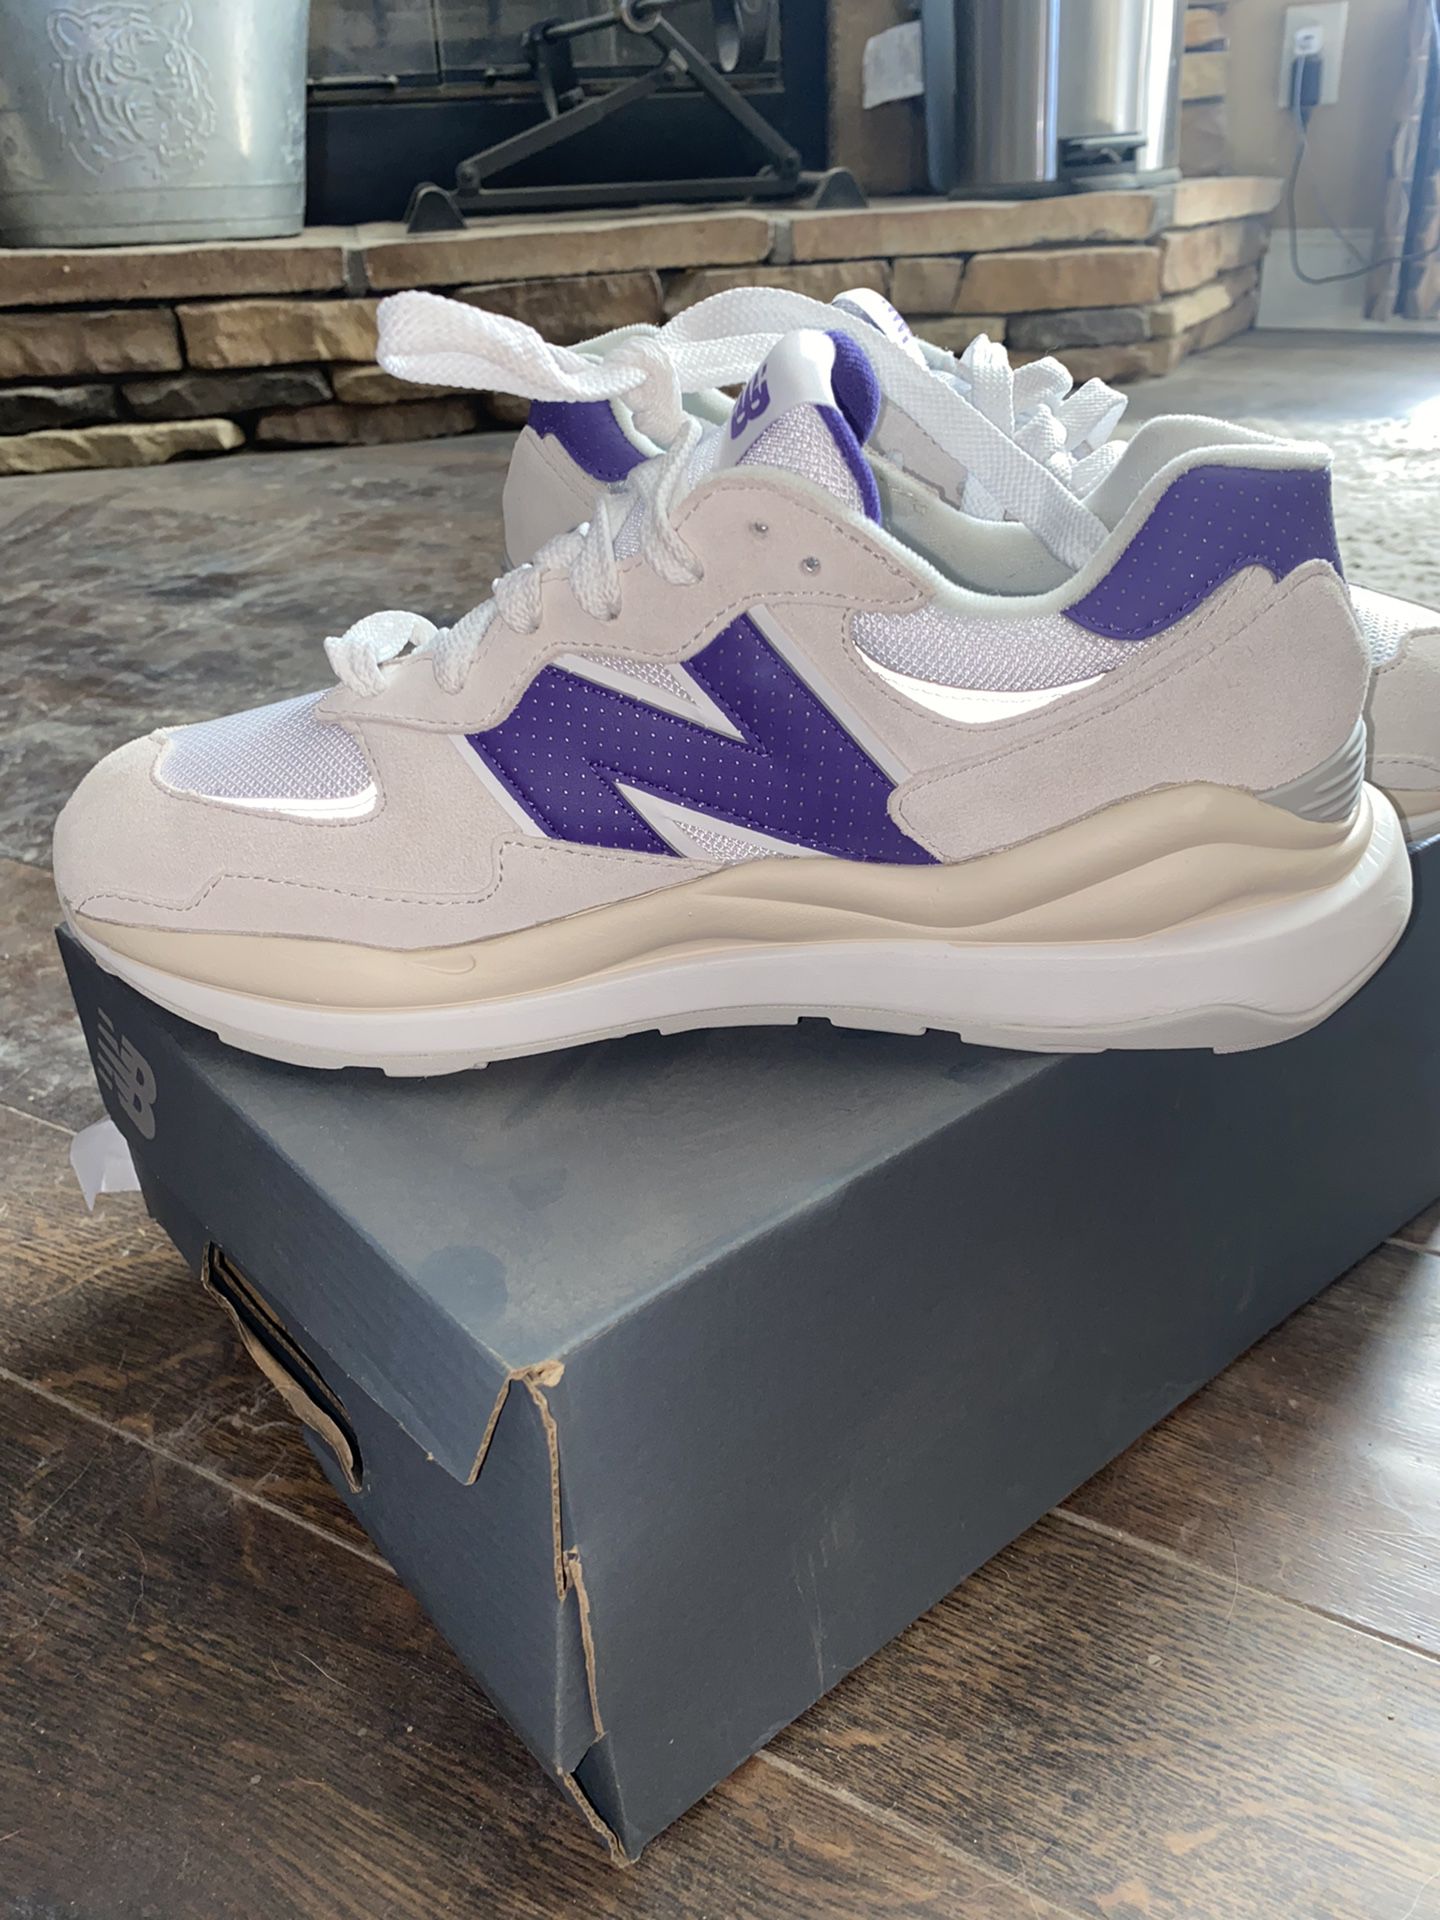 New Balance Shoes for Sale in Baton Rouge, LA - OfferUp